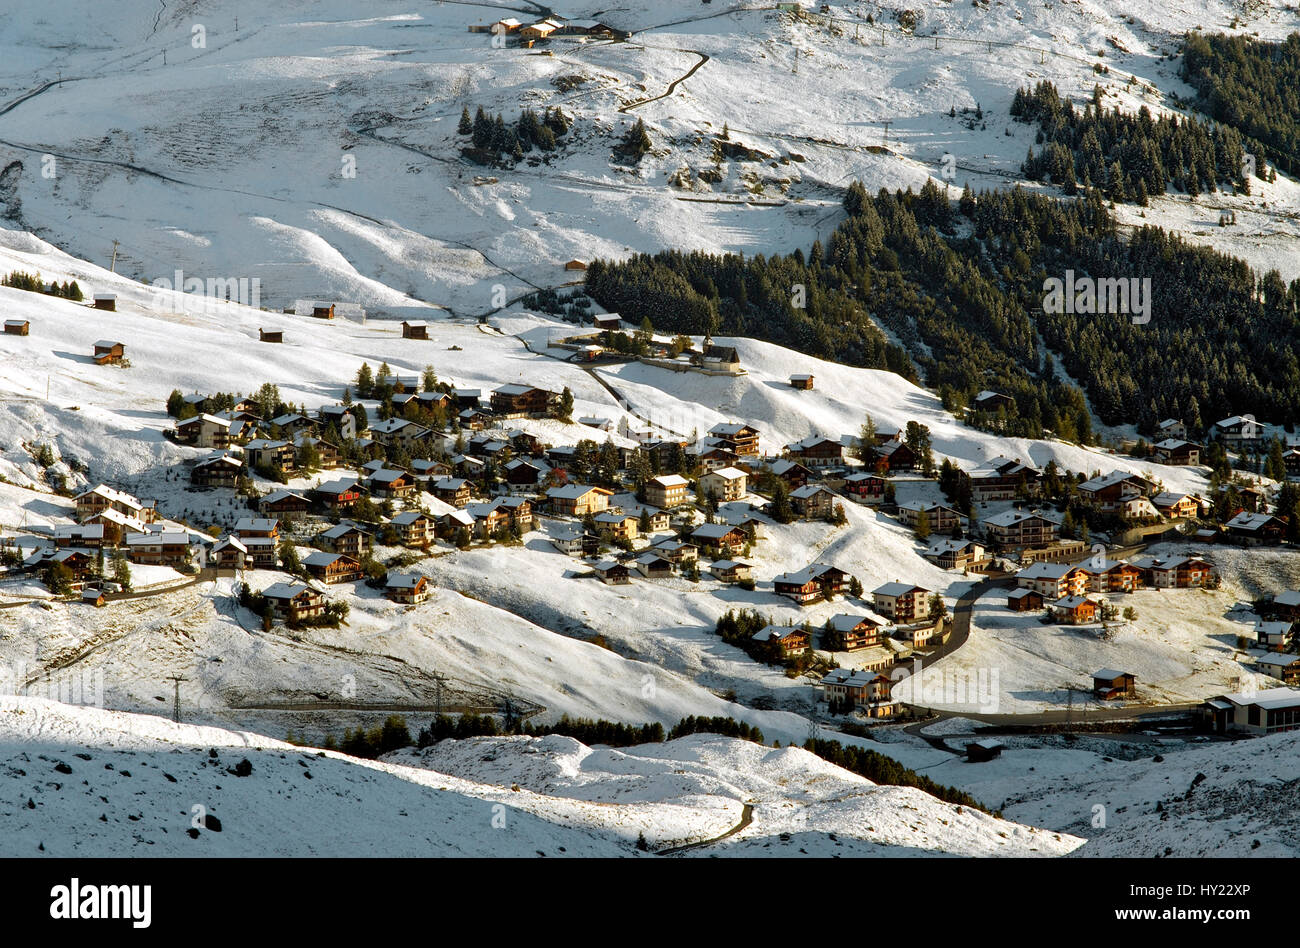 This stock photo shows the small mountain village of Arosa a ski resort in Switzerland. Arosa is surrounded by mountains and is quite a famous Swiss s Stock Photo